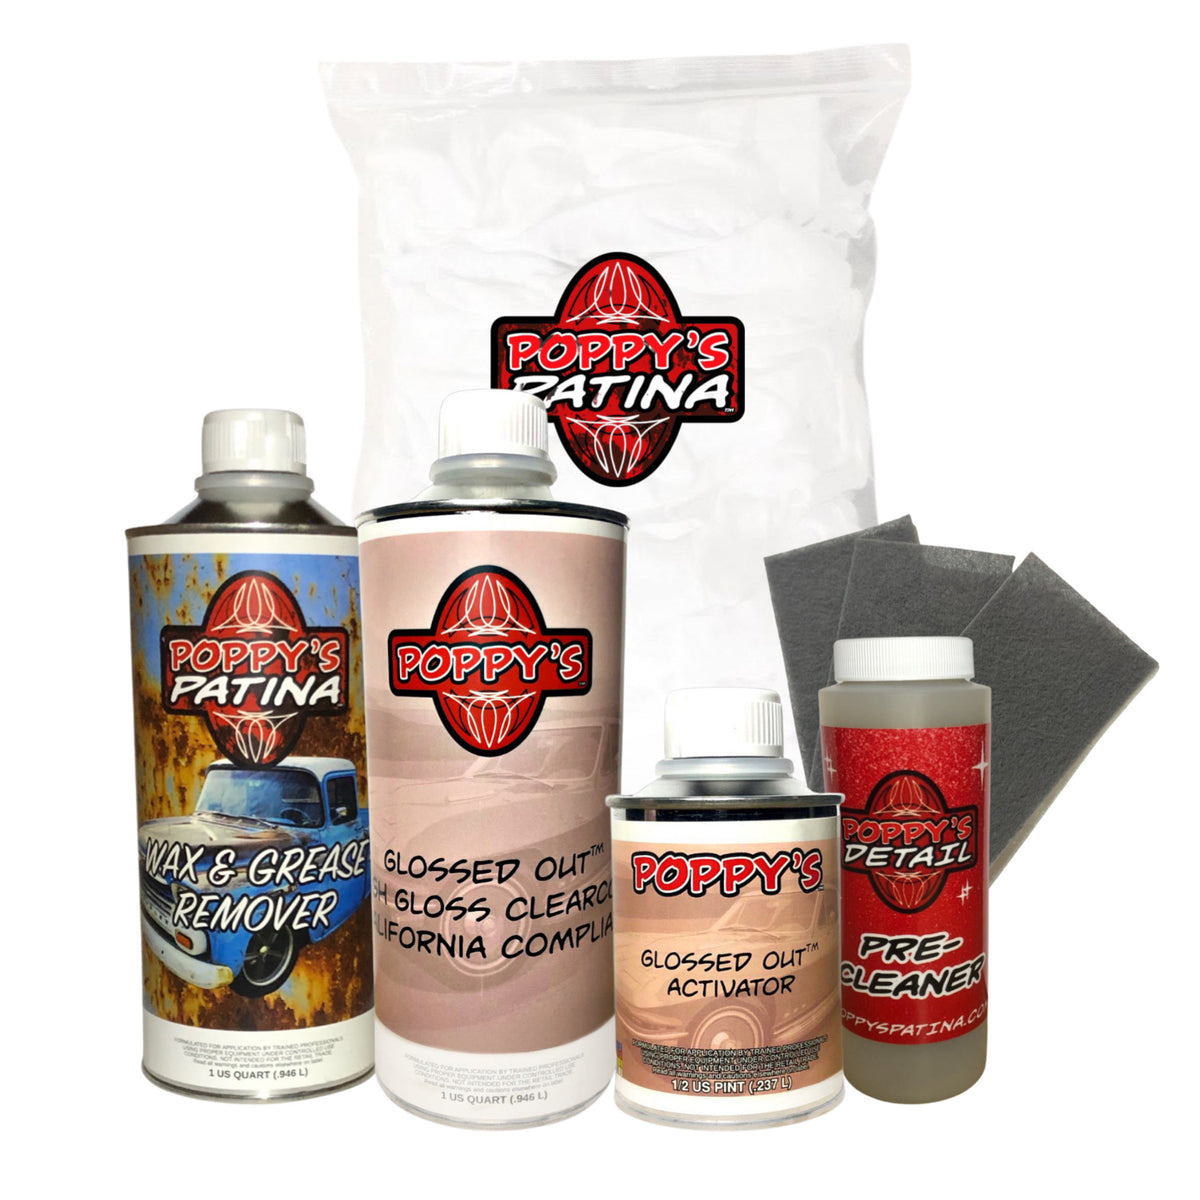 Poppy's Patina Clear Coat Wipe or Spray-On Protection in Matte or Gloss